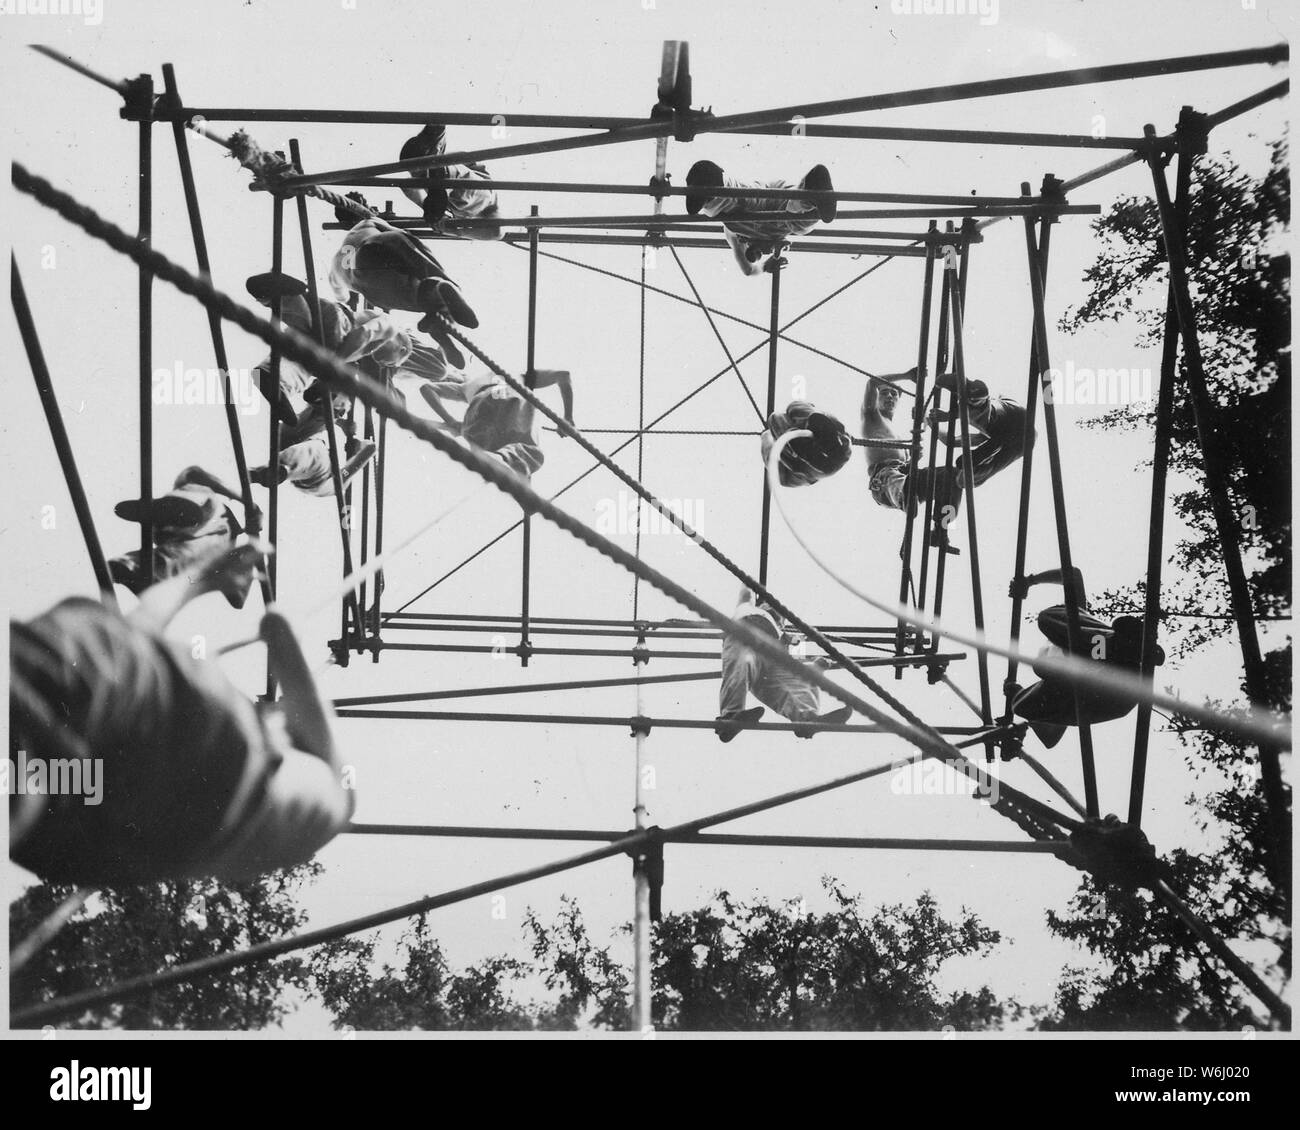 Jeds on high bars in obstacle course. Milton Hall, England, circa 1944., 1943 - 1944; General notes:  Use War and Conflict Number 737 when ordering a reproduction or requesting information about this image. Stock Photo